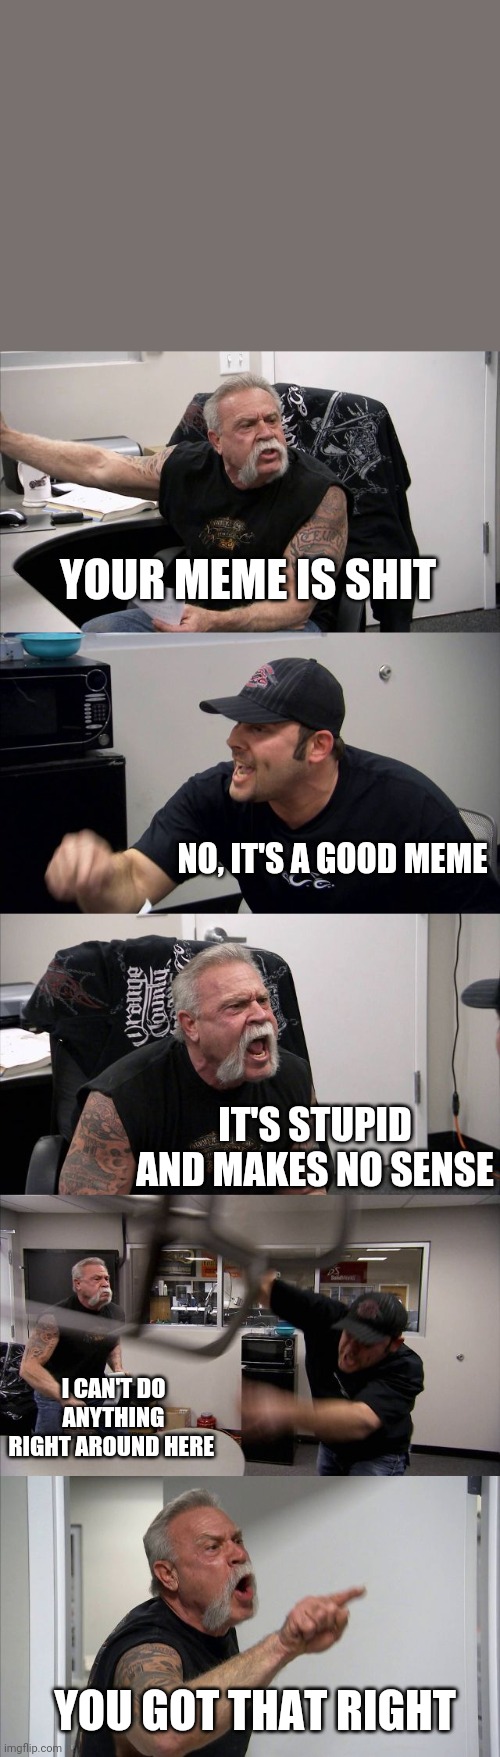 American Chopper Argument Meme | YOUR MEME IS SHIT; NO, IT'S A GOOD MEME; IT'S STUPID AND MAKES NO SENSE; I CAN'T DO ANYTHING RIGHT AROUND HERE; YOU GOT THAT RIGHT | image tagged in memes,american chopper argument | made w/ Imgflip meme maker